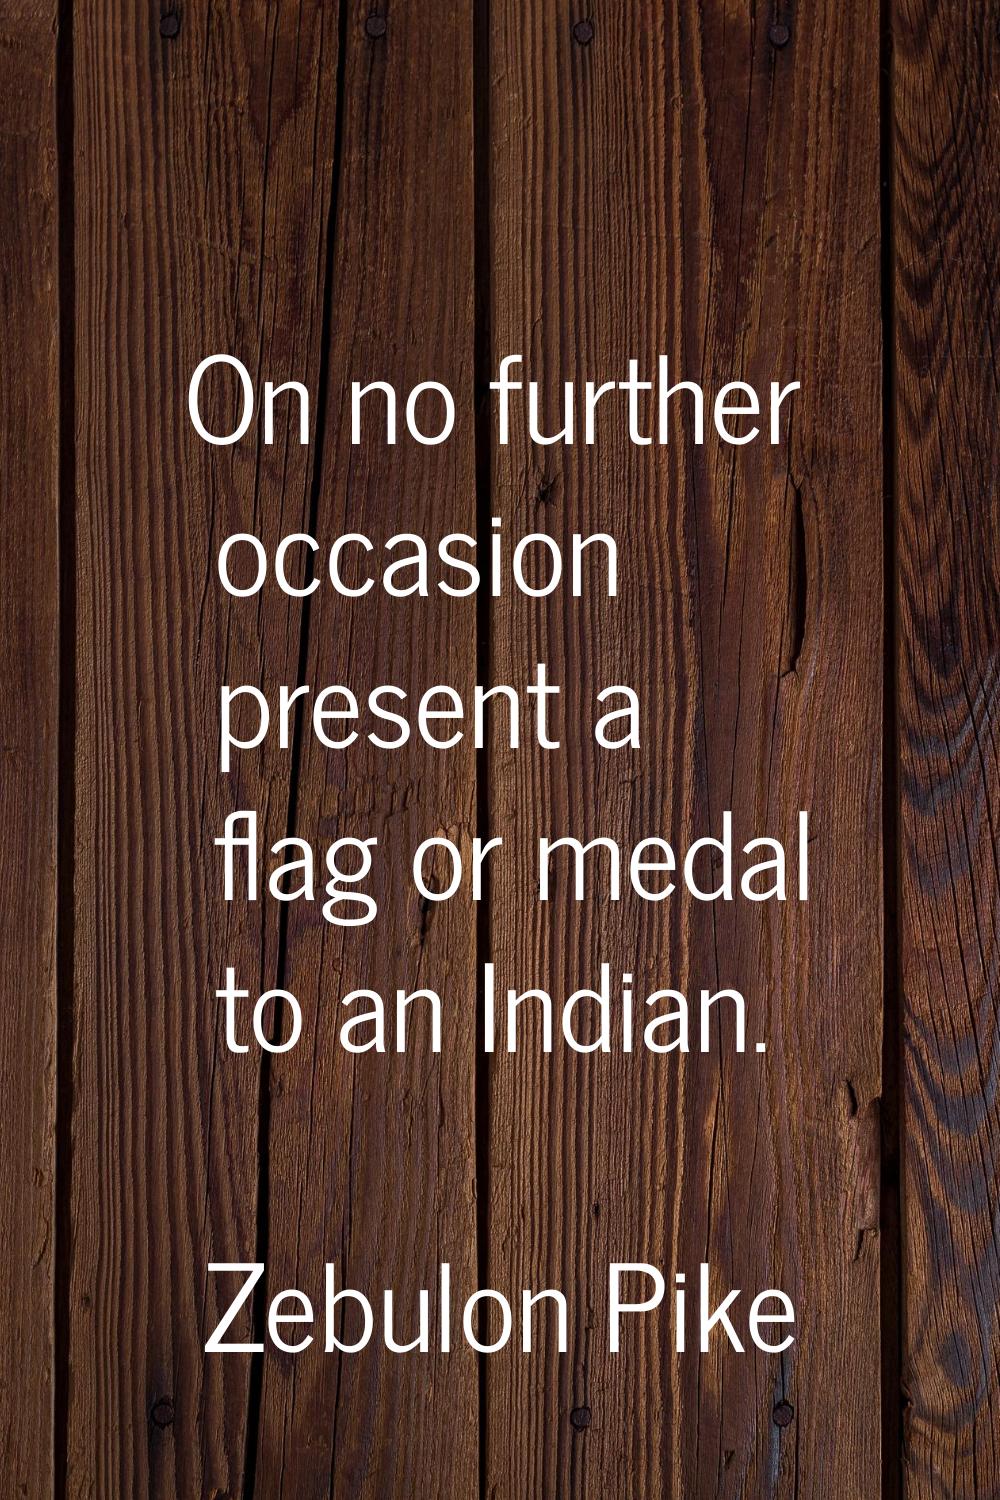 On no further occasion present a flag or medal to an Indian.